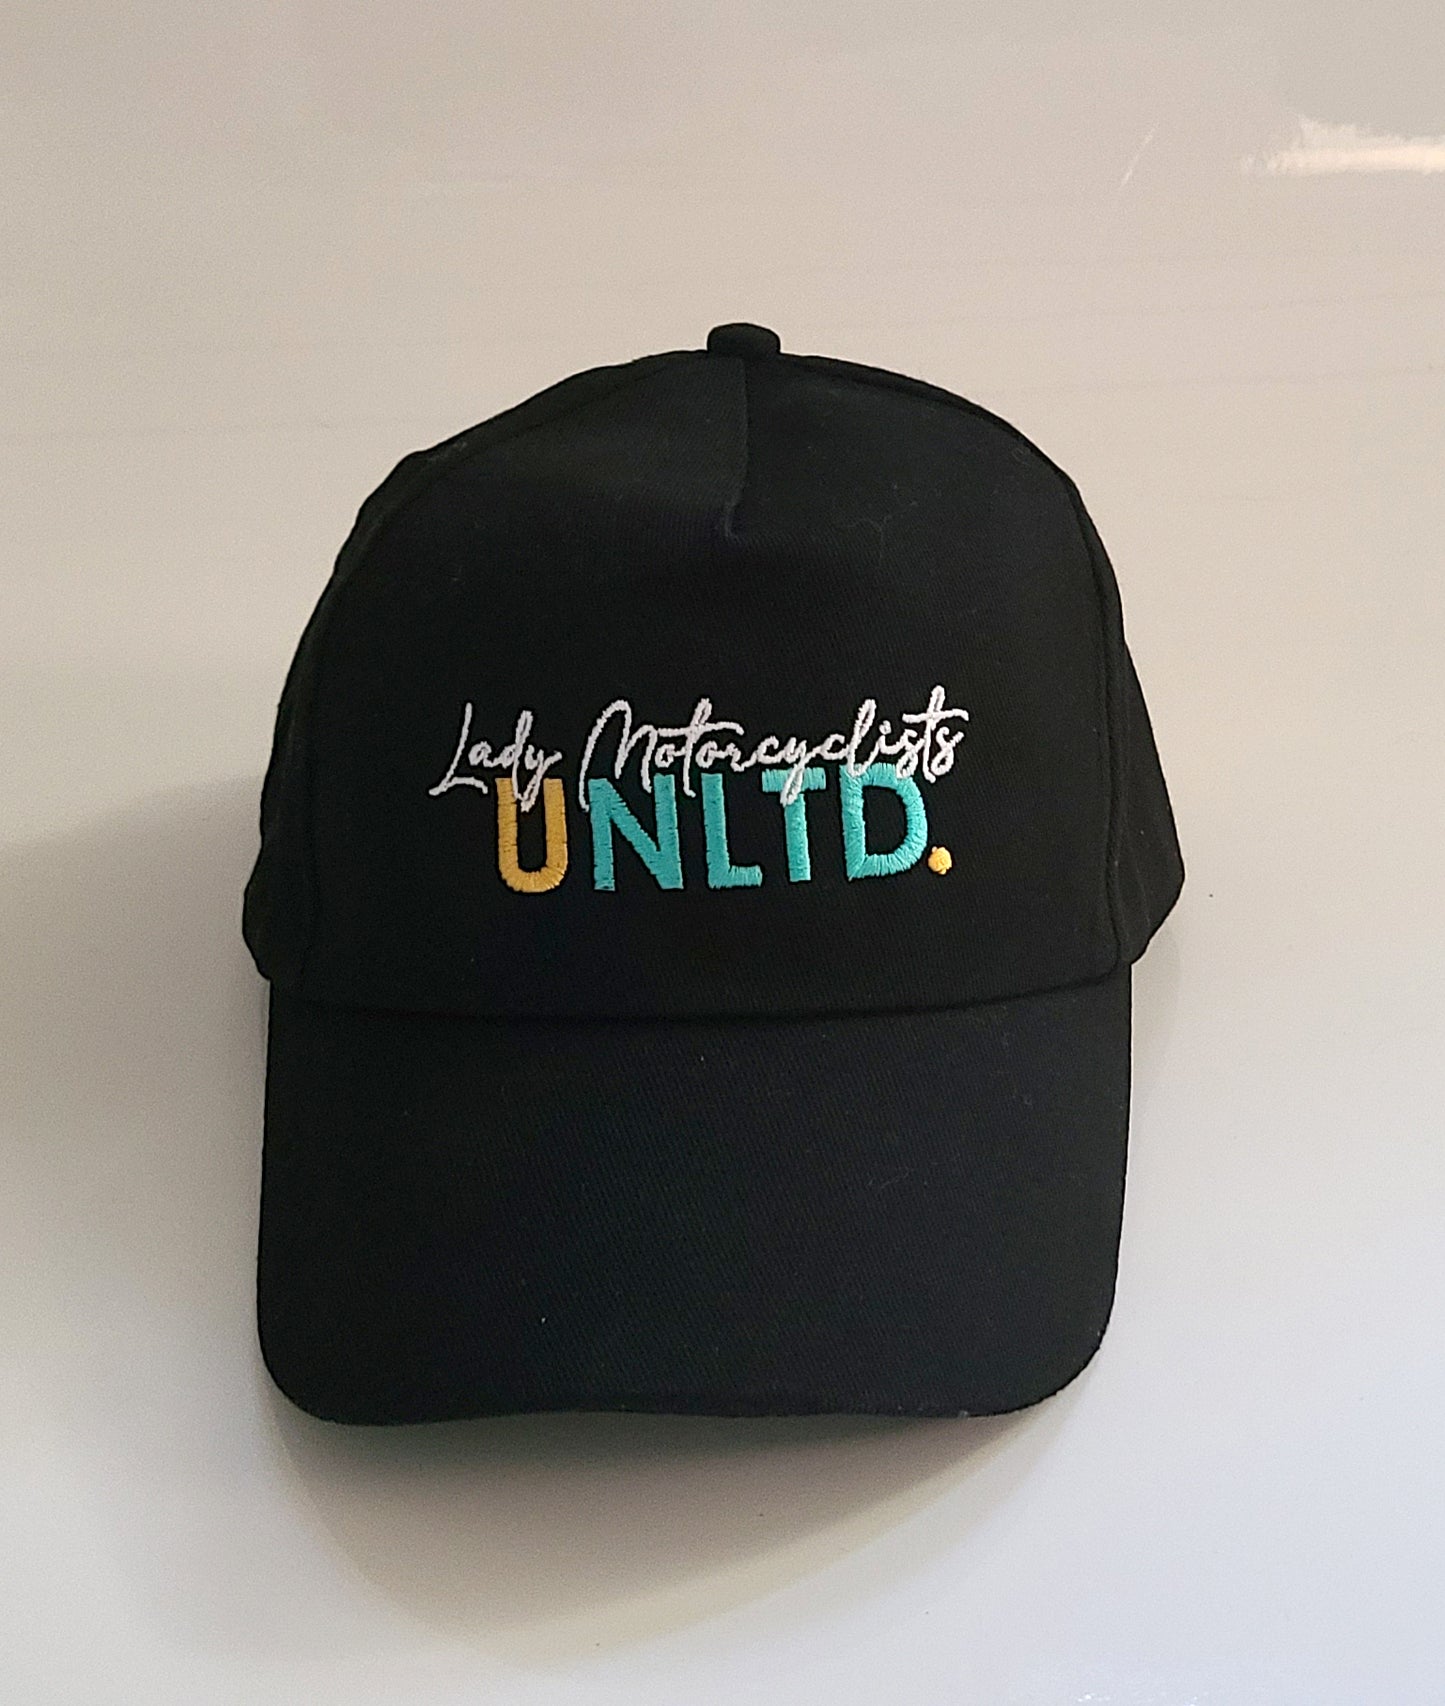 Embroidered Lady Motorcyclists Unlimited logo relaxed fit dad cap